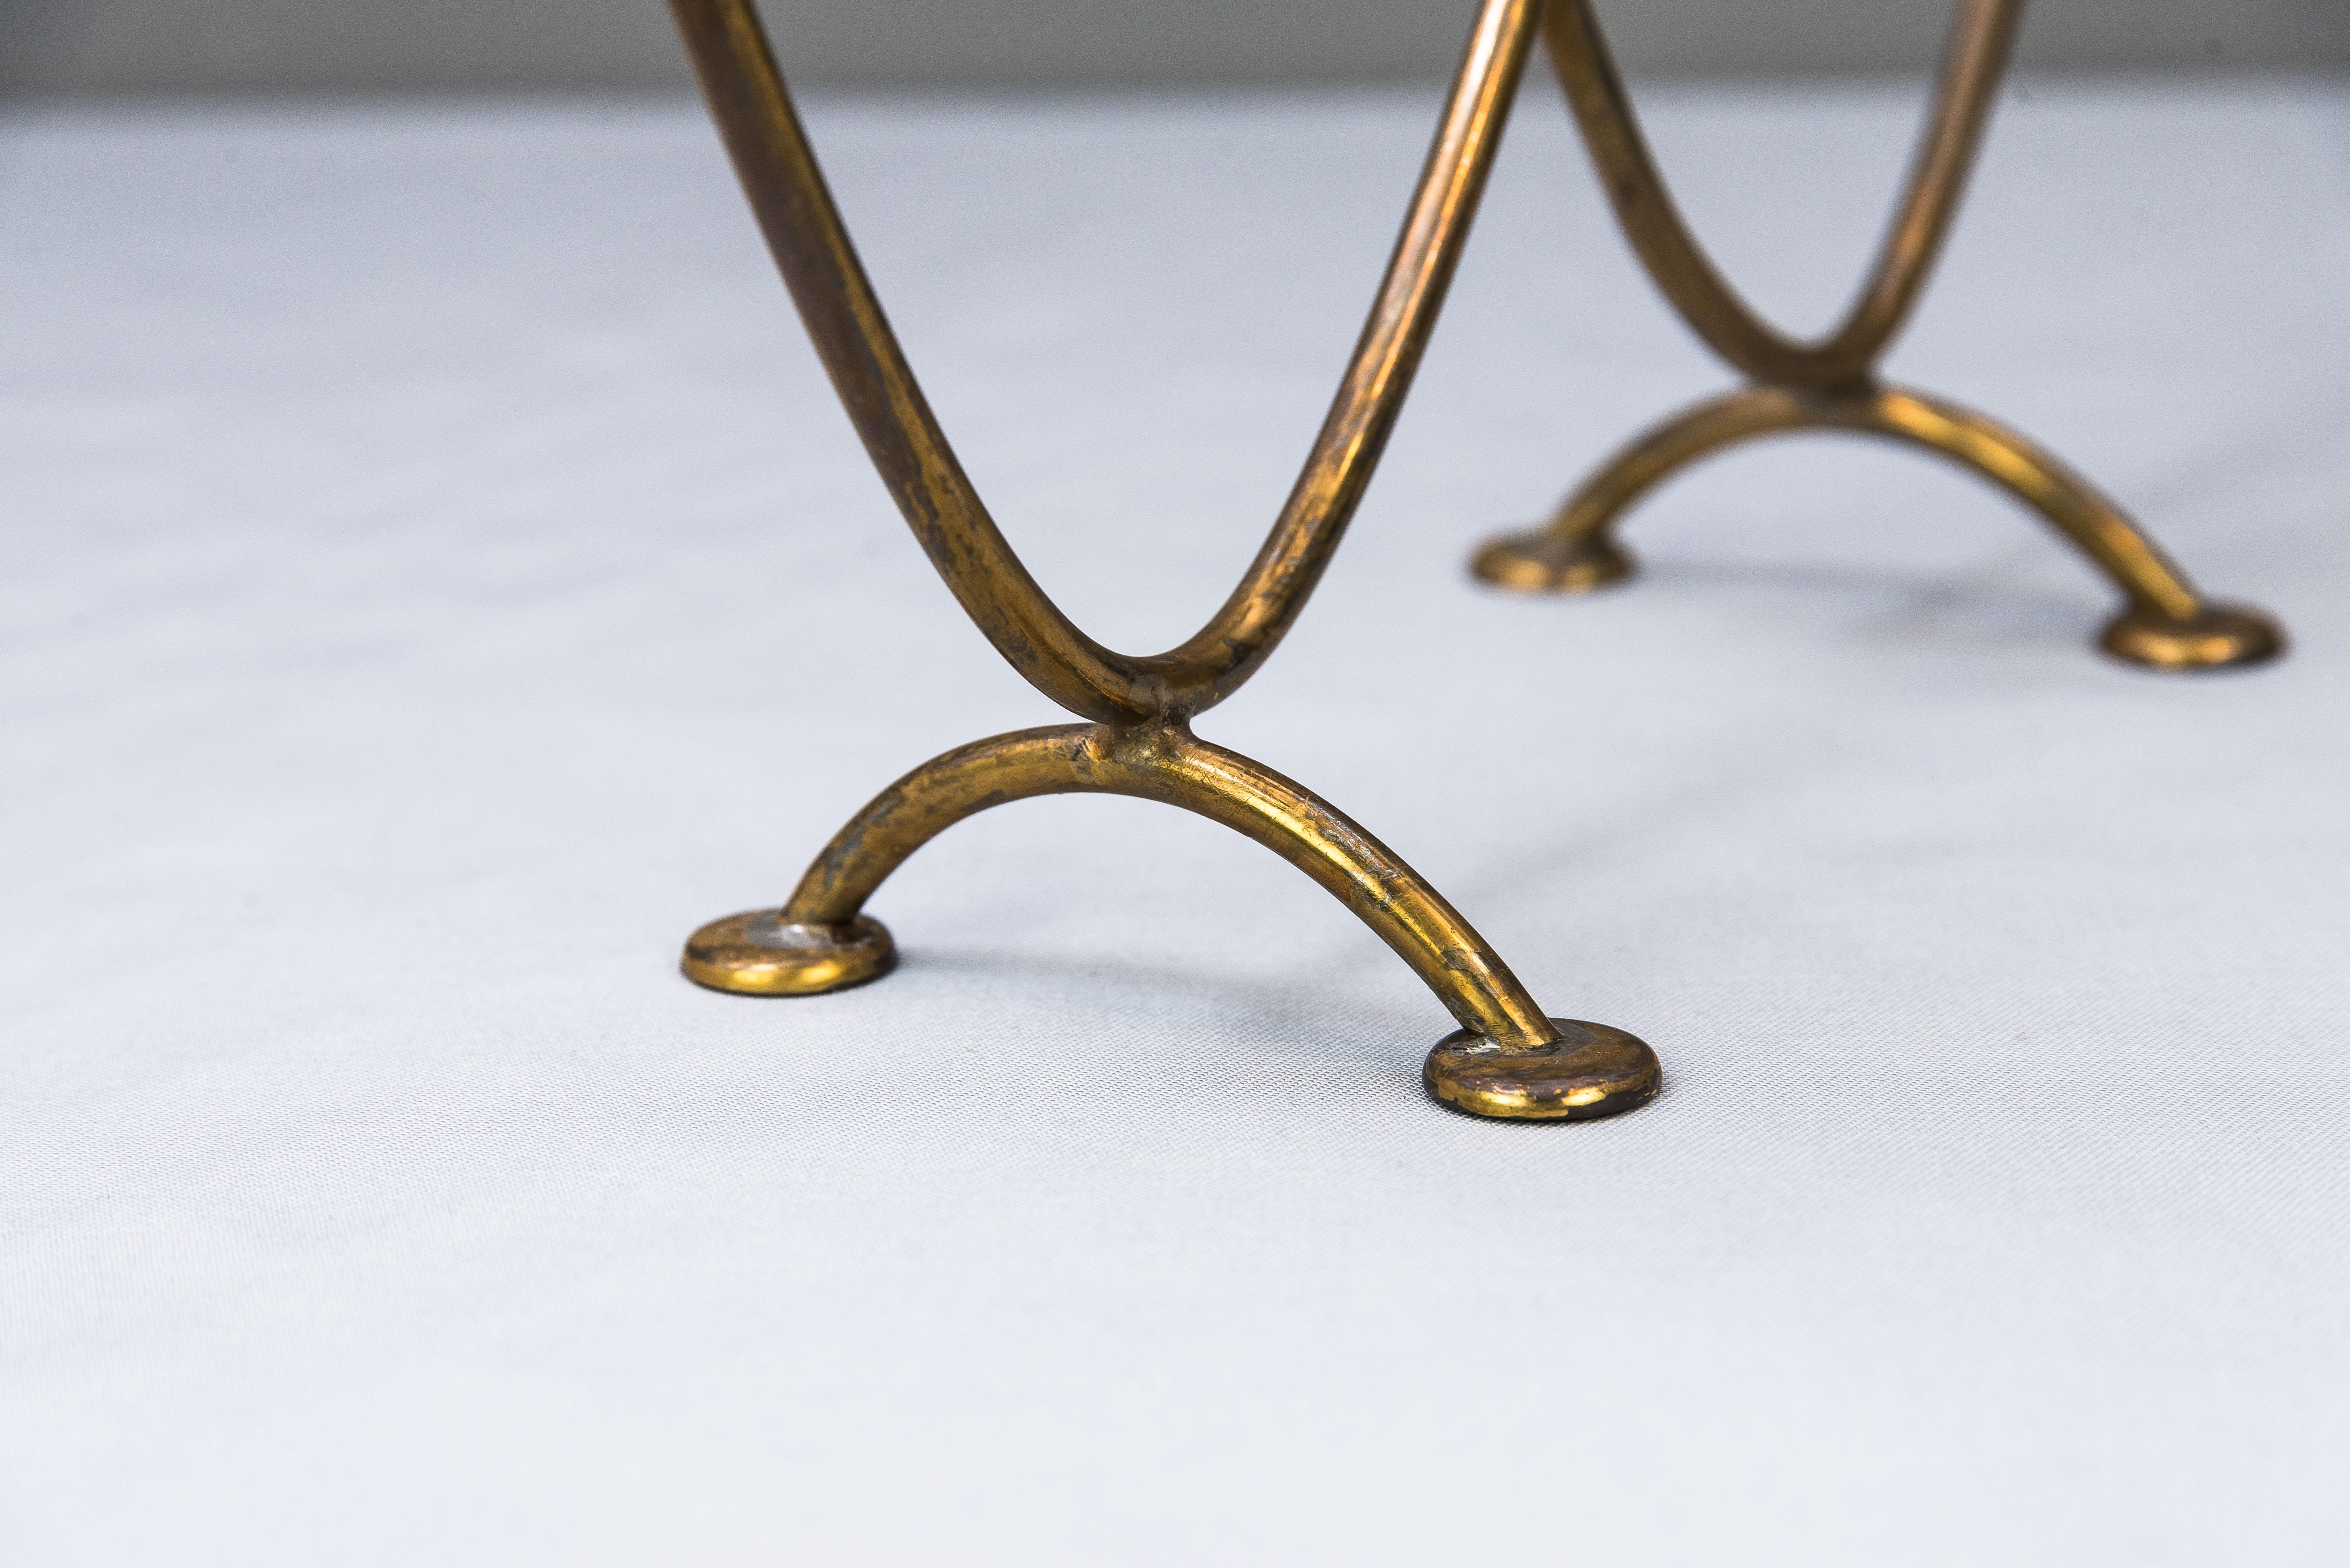 Mid-20th Century Candleholder for 4 Candles Execution in Copper and Brass, circa 1950s For Sale